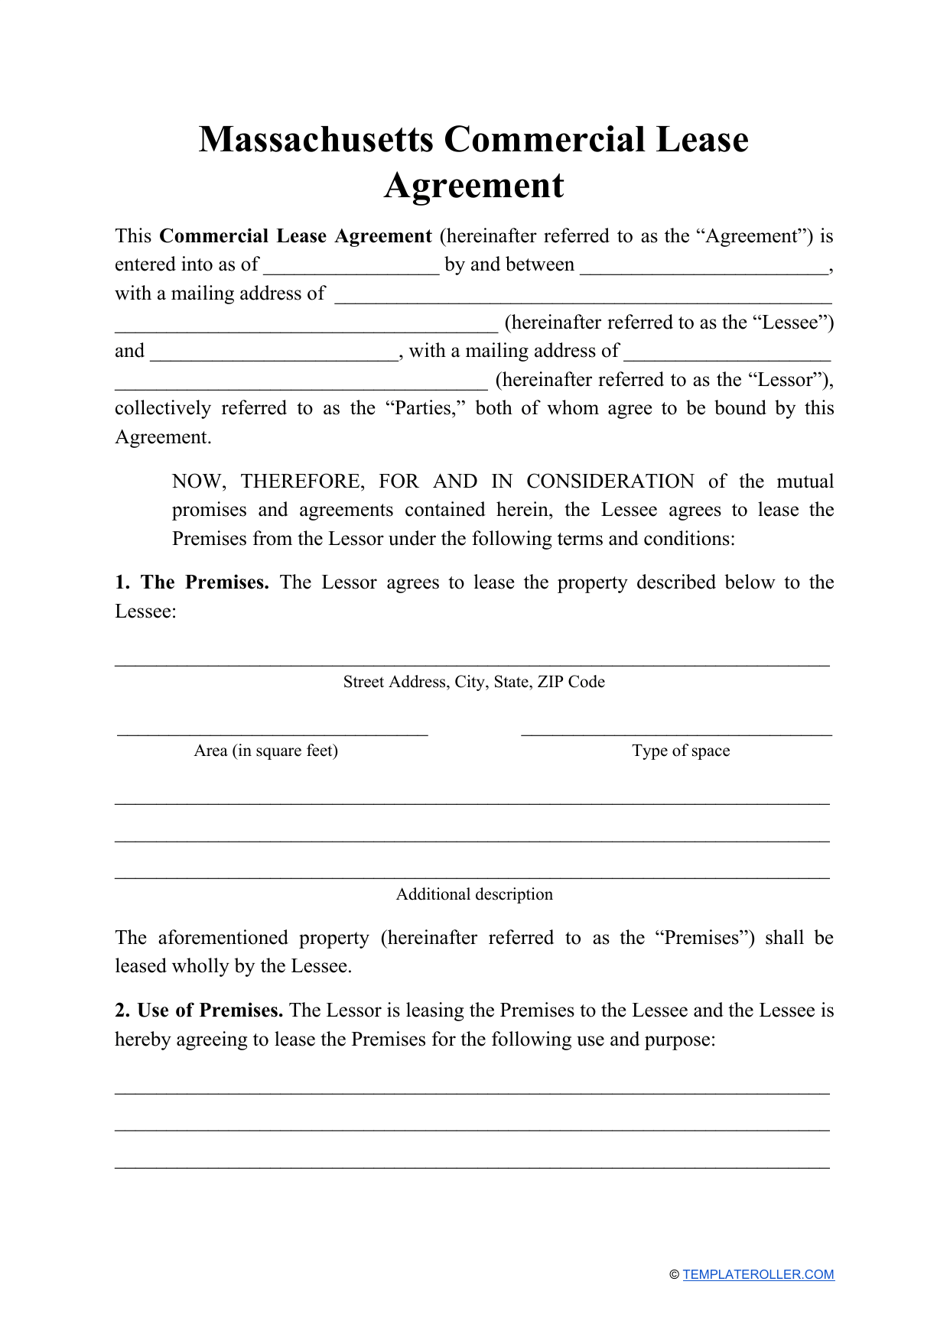 massachusetts-commercial-lease-agreement-template-fill-out-sign